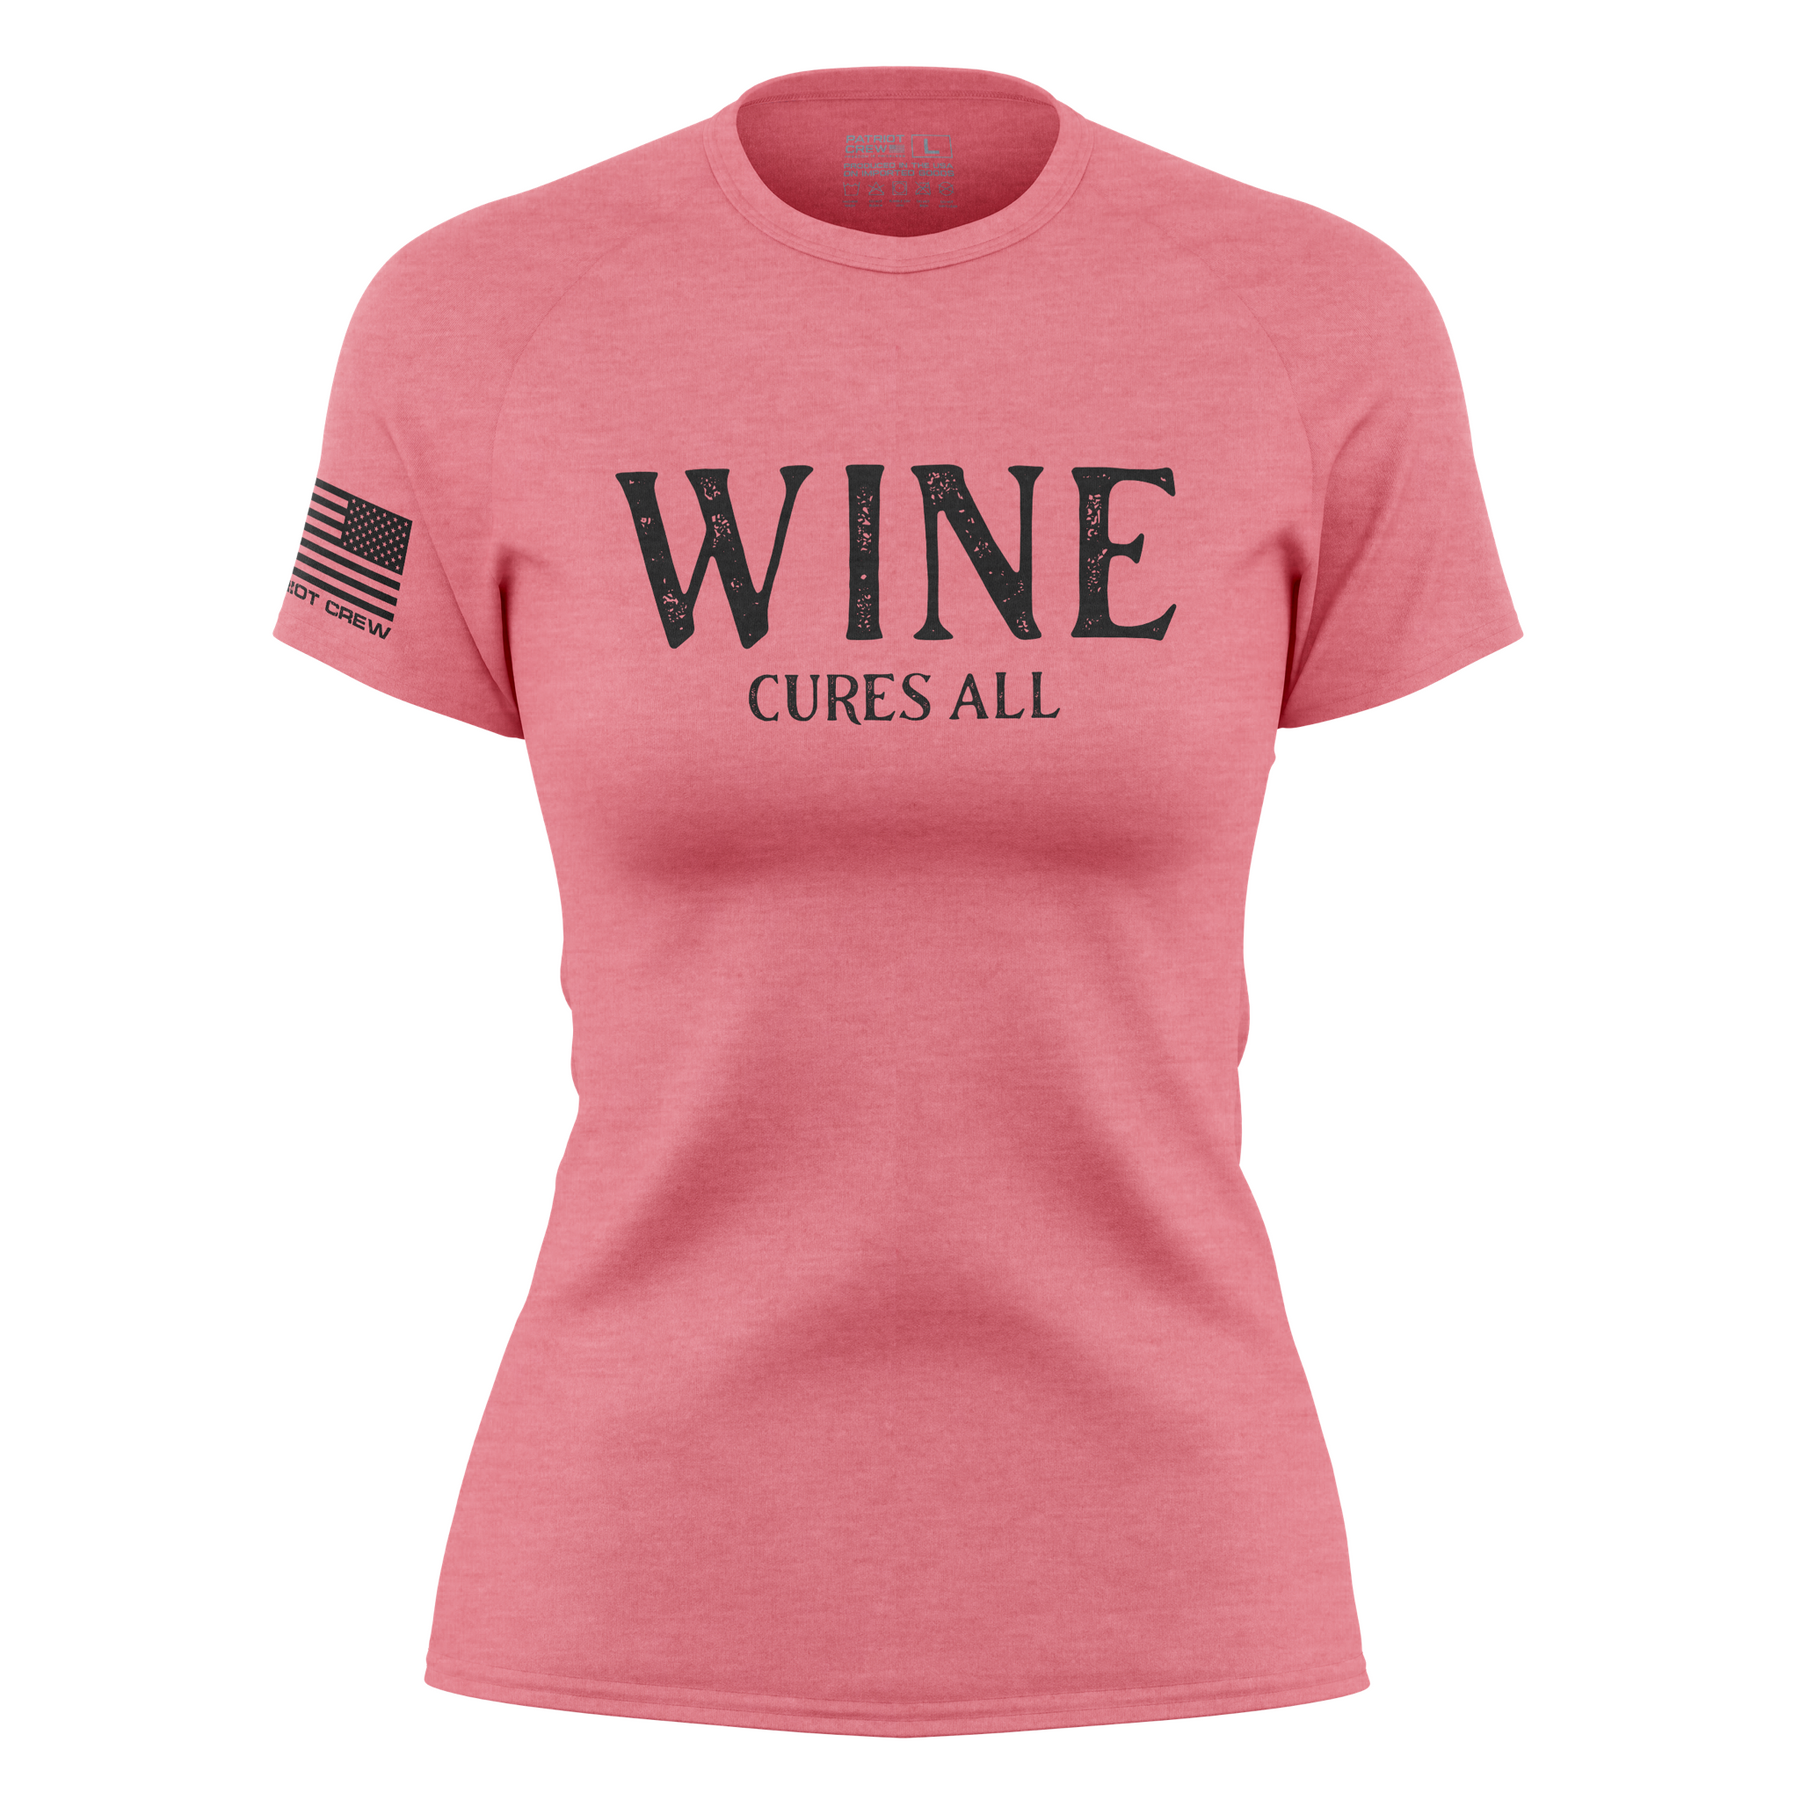 Women's Wine Cures All T-Shirt